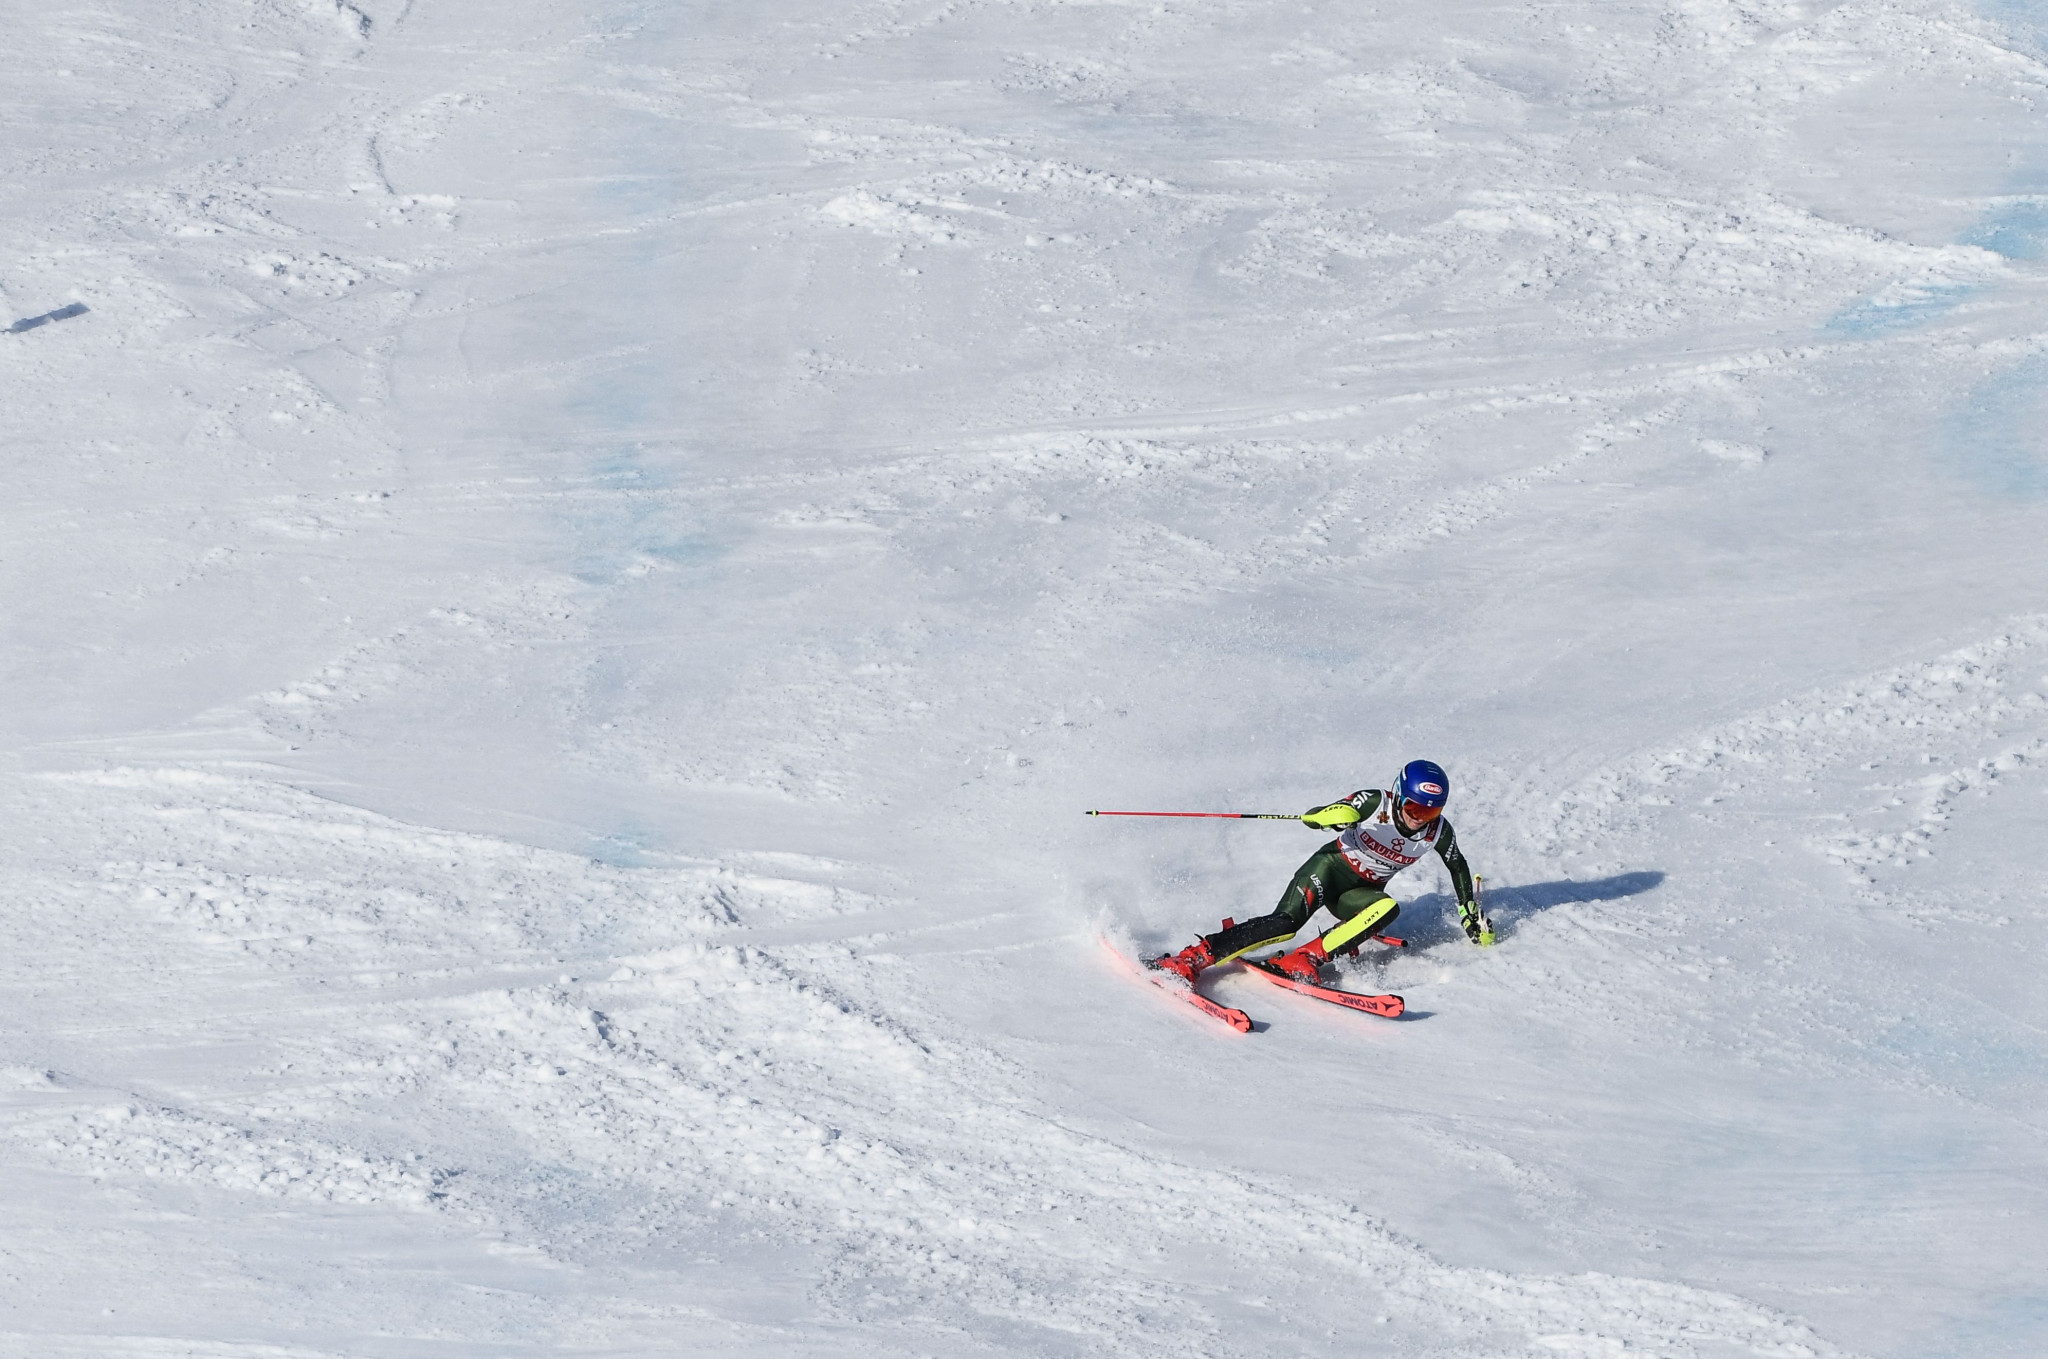 United States' Mikaela Shiffrin was second in the first run as she hoped to defend her title ©Getty Images